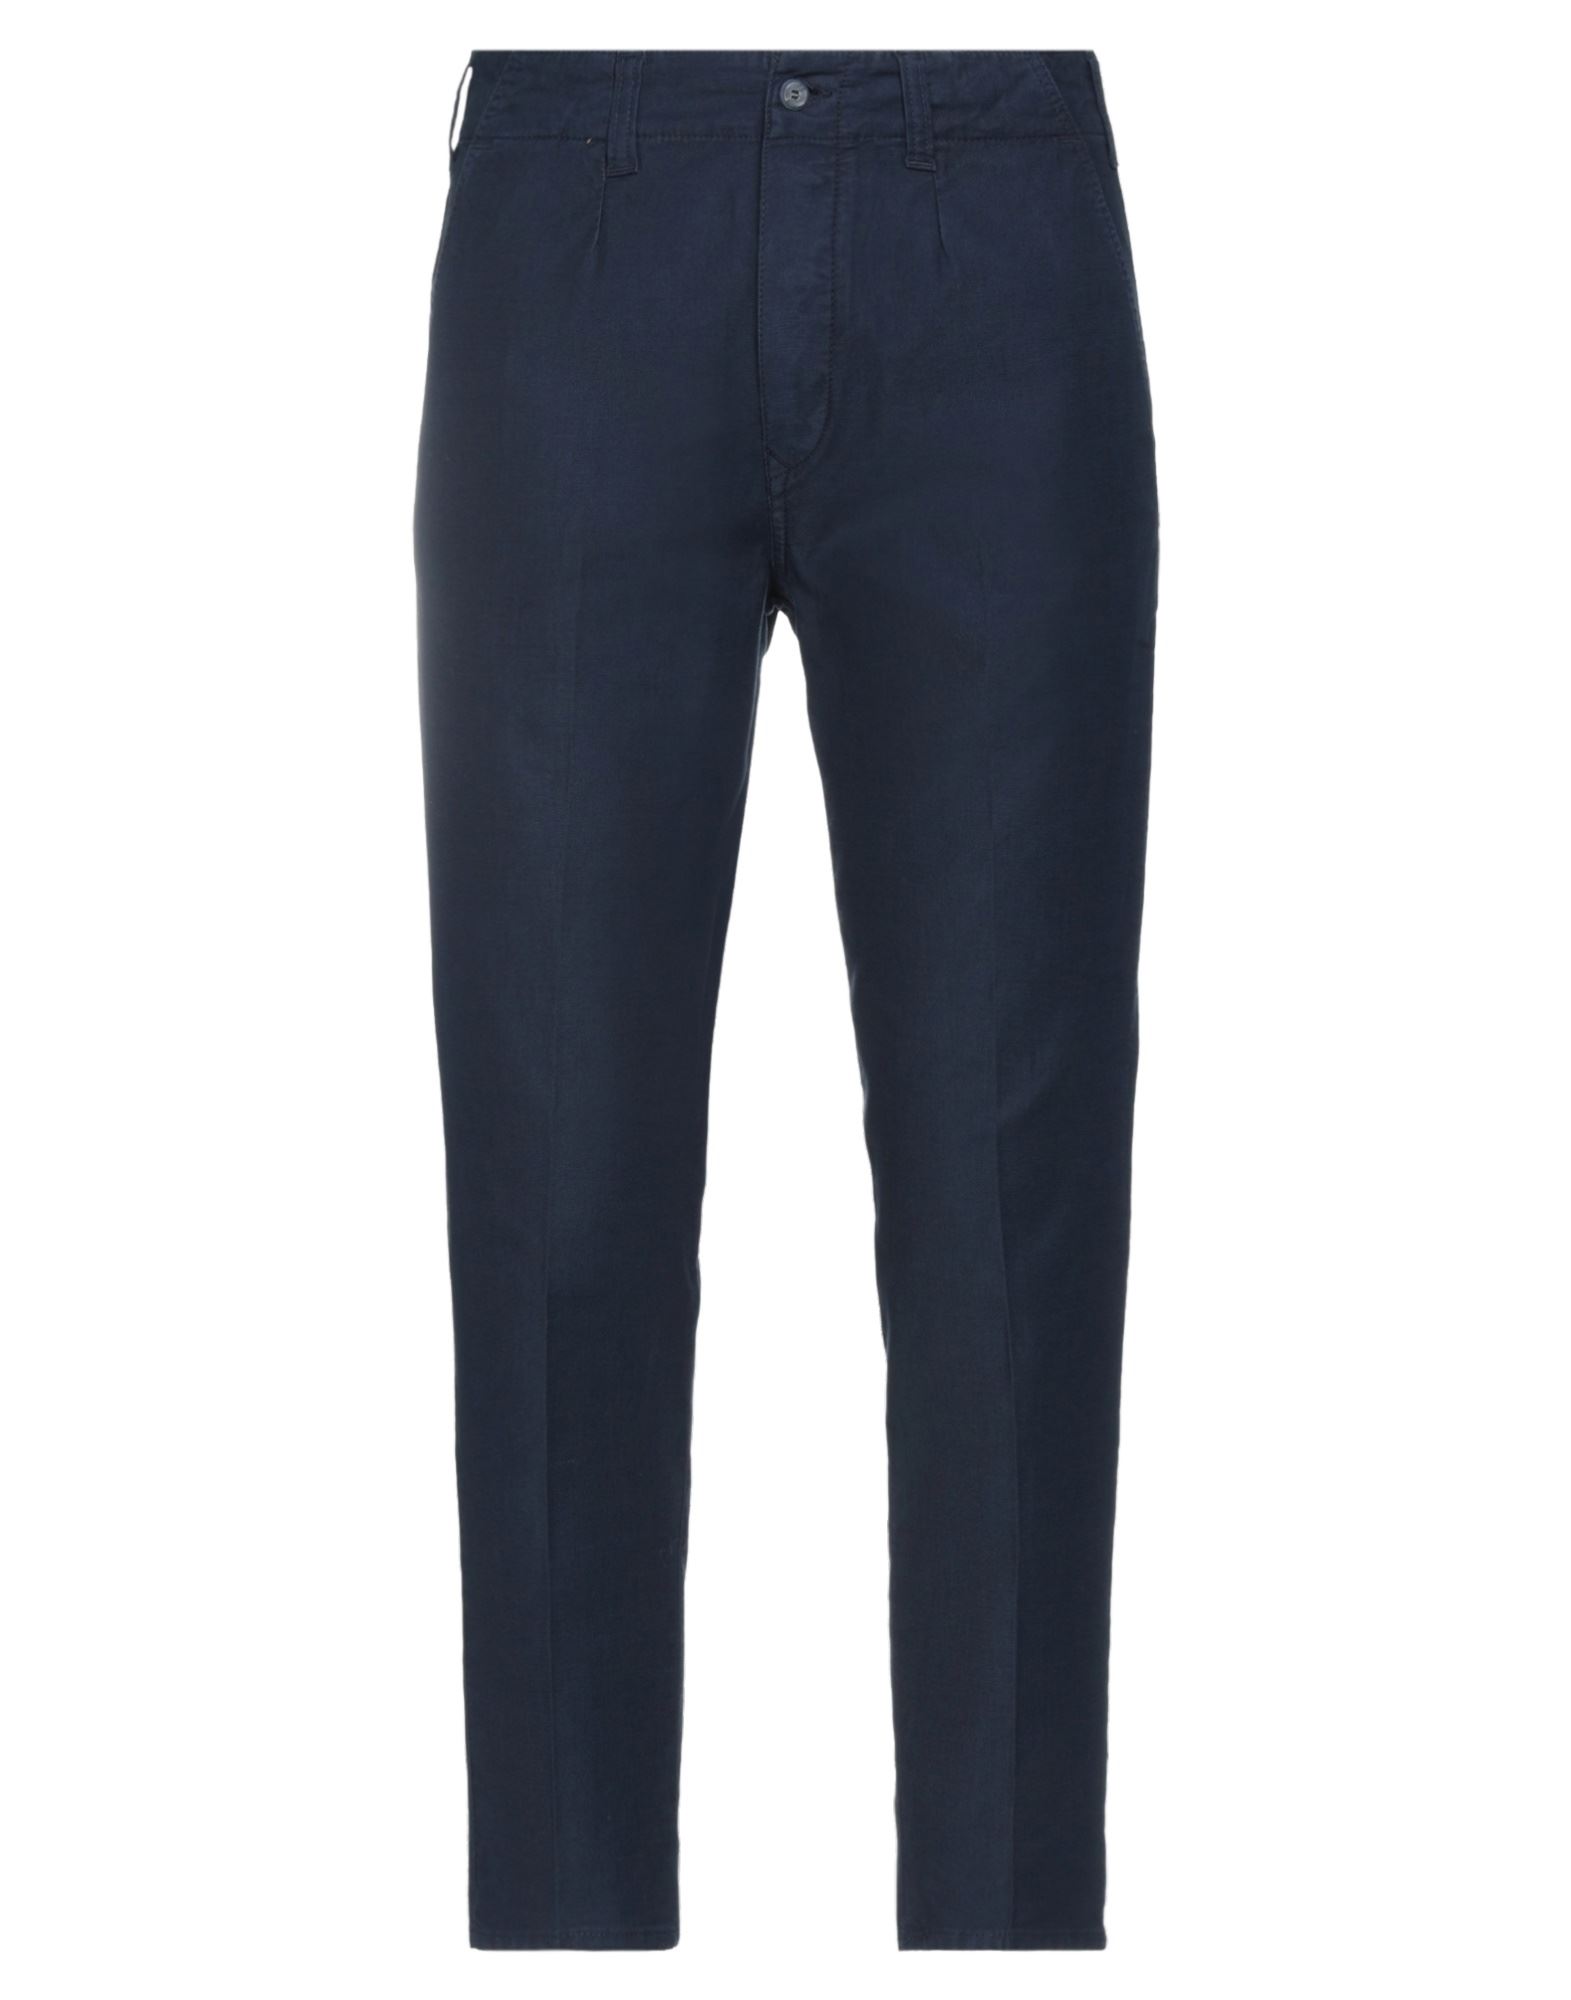 DON THE FULLER DON THE FULLER MAN PANTS MIDNIGHT BLUE SIZE 30 COTTON, ELASTANE,13525583WI 10